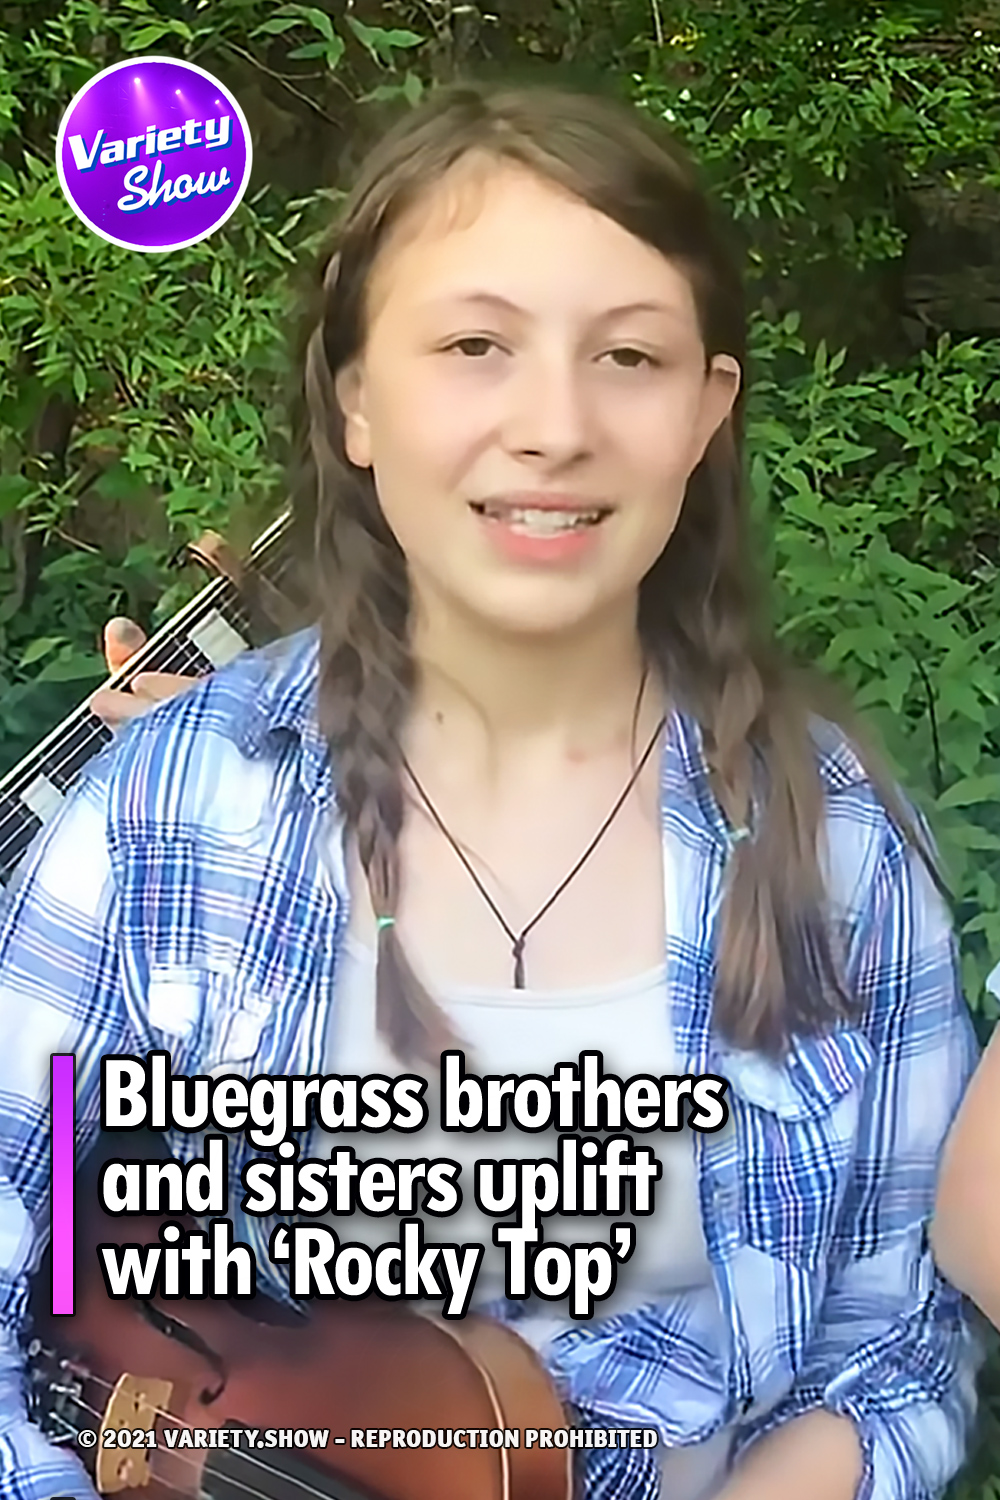 Bluegrass brothers and sisters uplift with ‘Rocky Top’